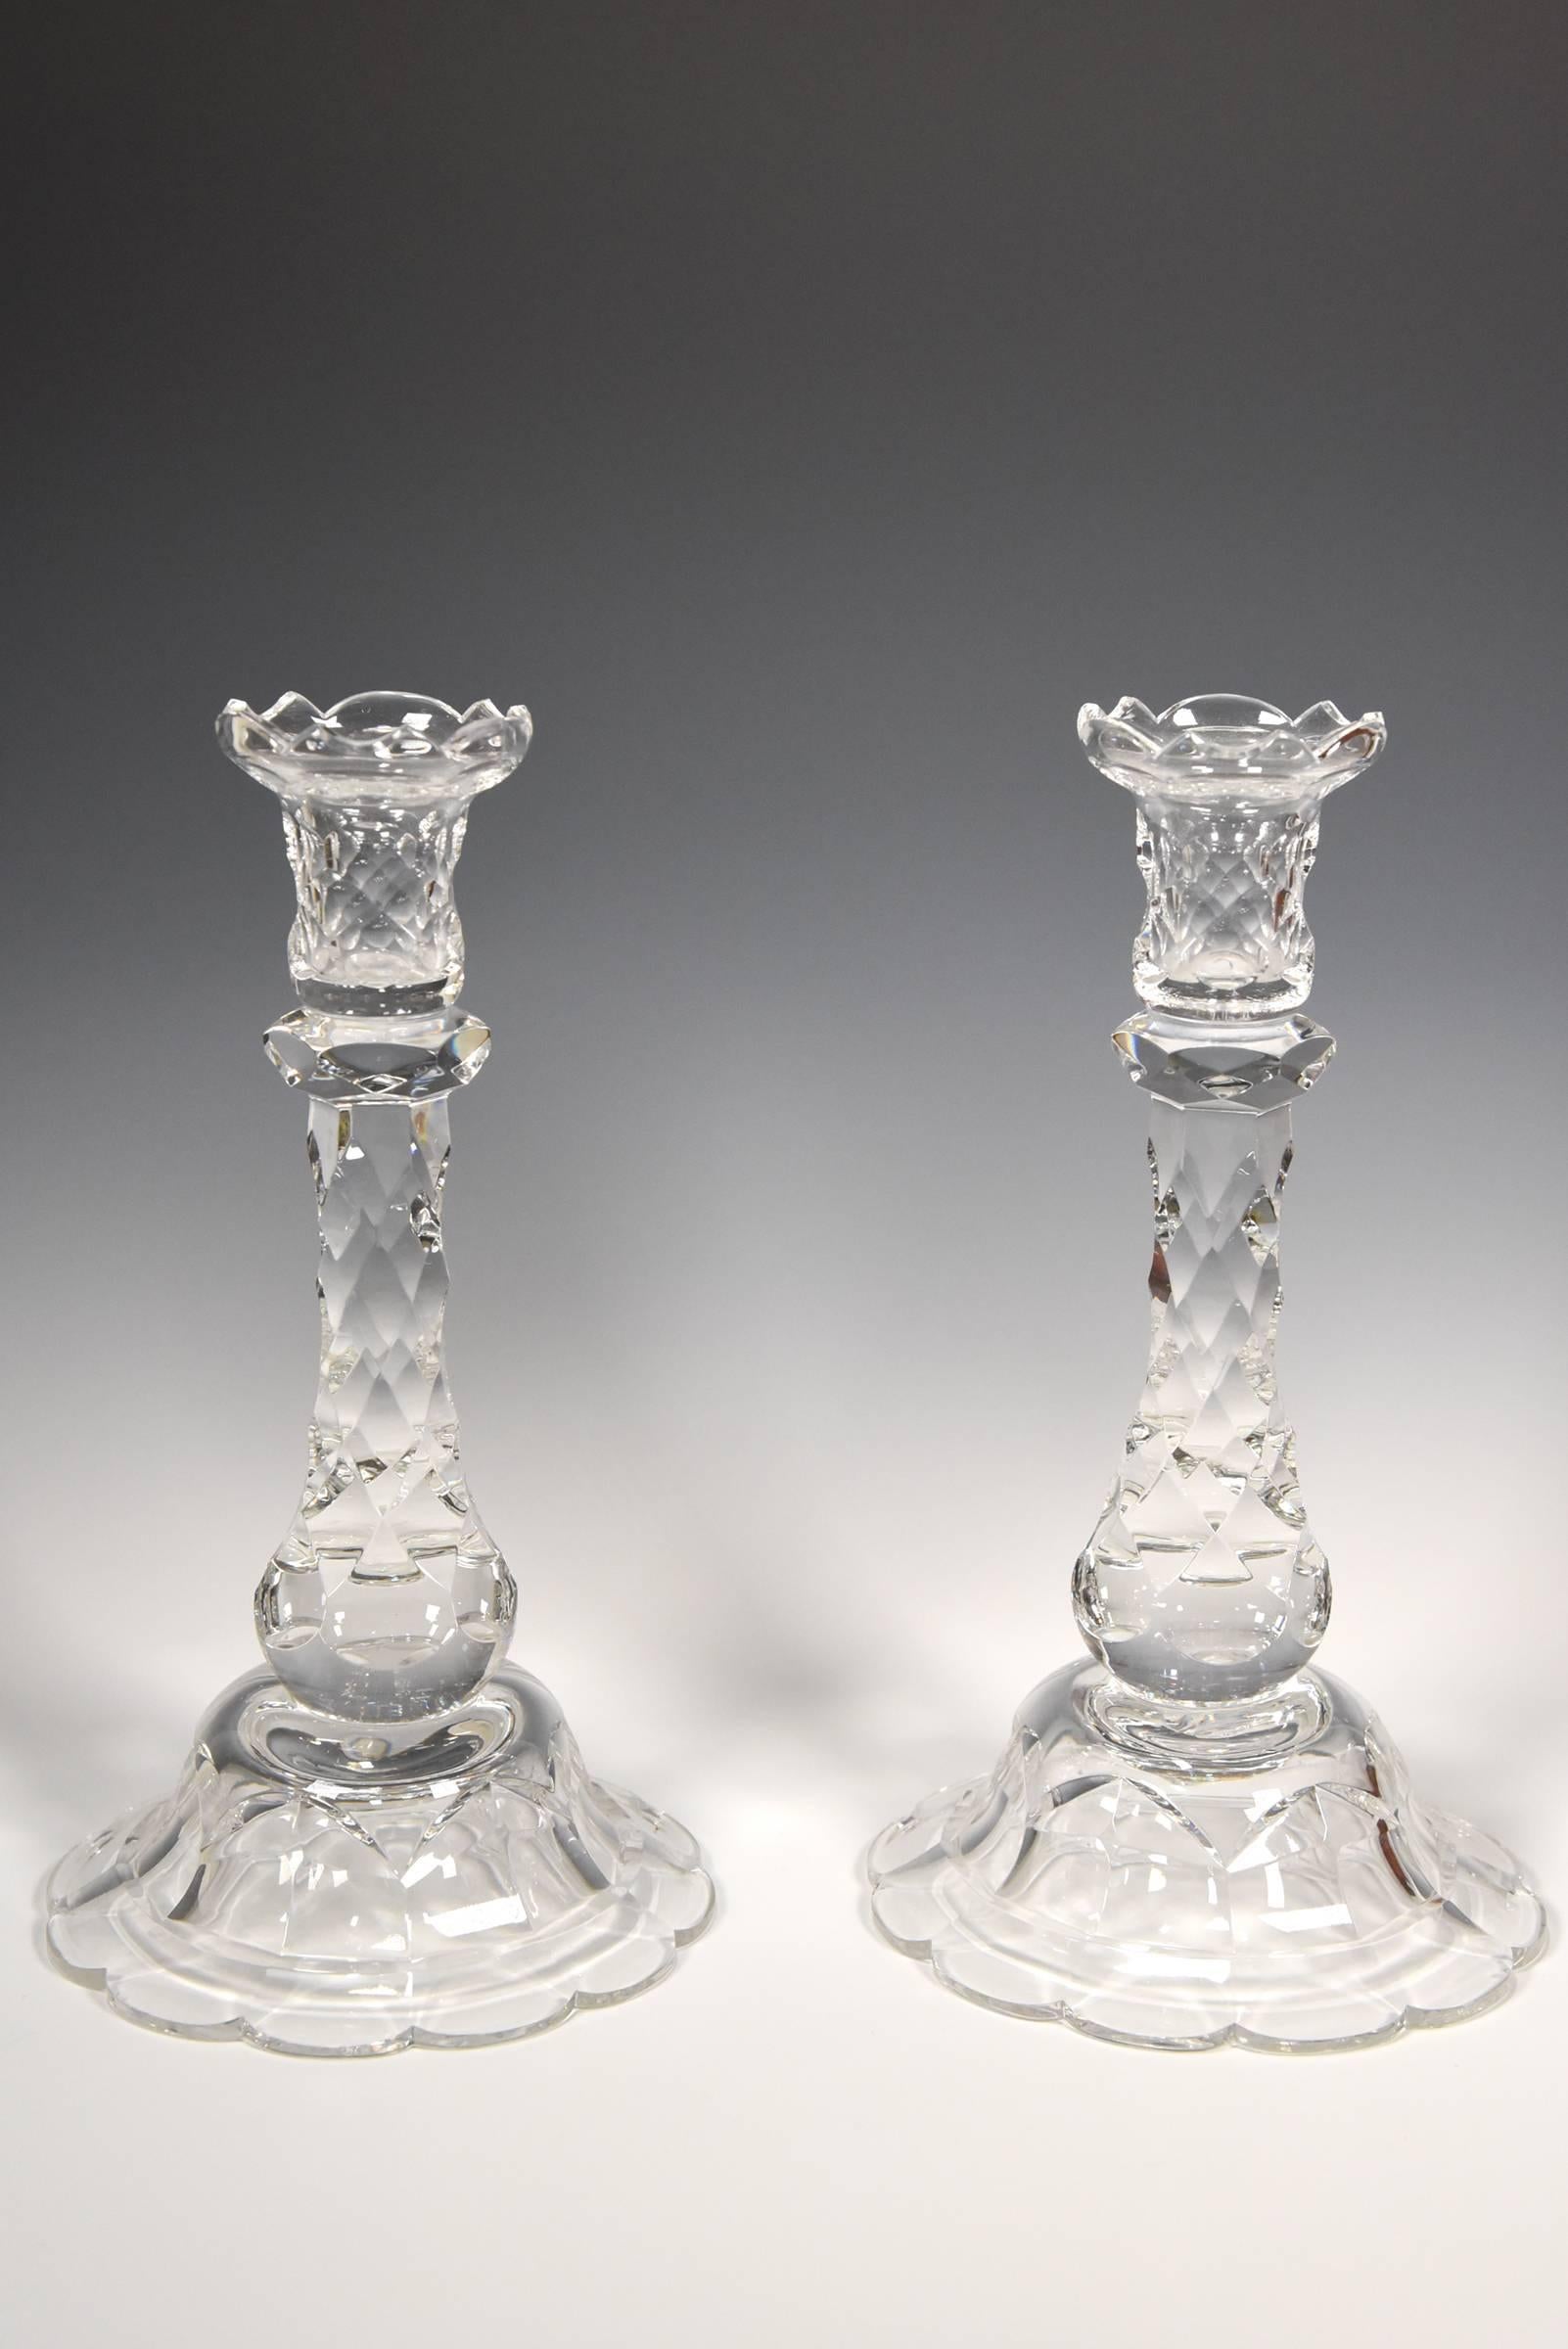 Two pairs of candlesticks offer a versatile grouping and these four matching hand blown crystal candlesticks are perfect examples. Made in England by Stuart Glassworks, they are cut in an early 19th century honeycomb pattern with a conical base and